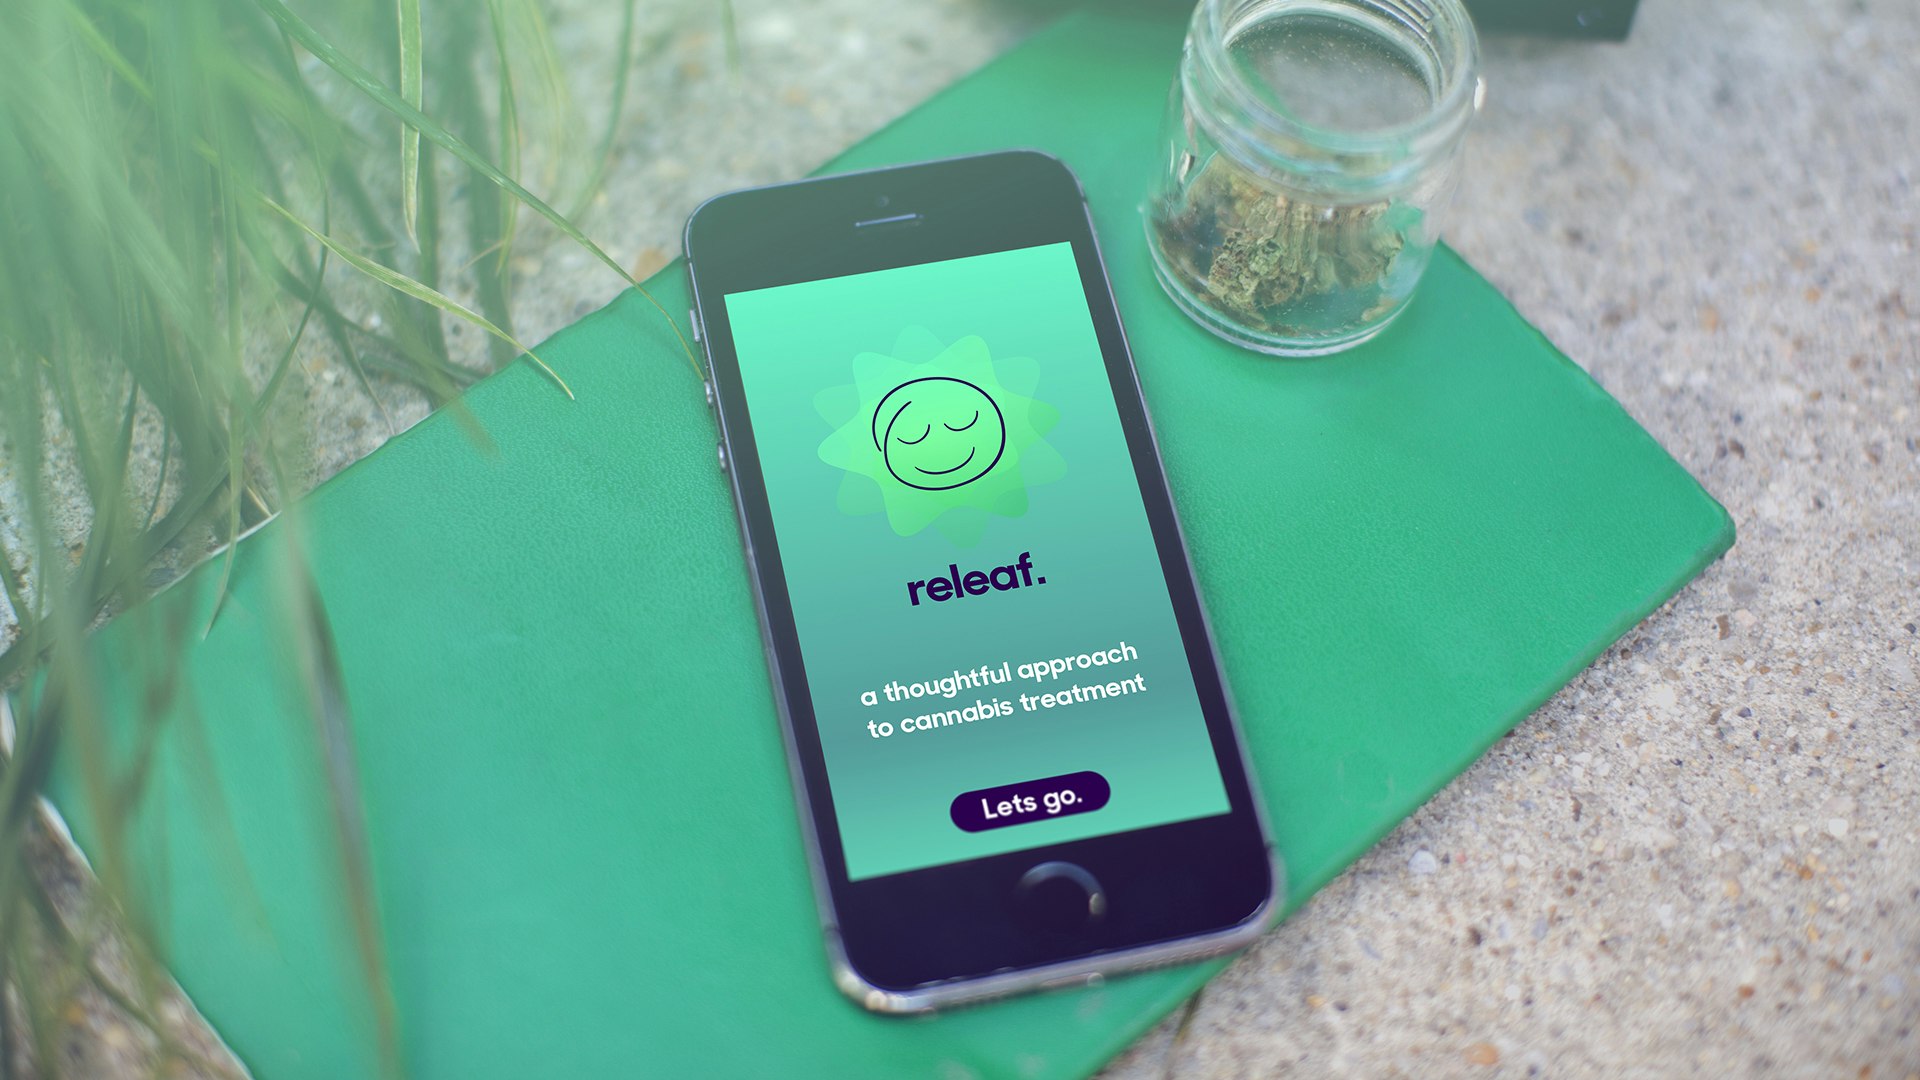 Releaf - a thoughtful approach to cannabis treatment.